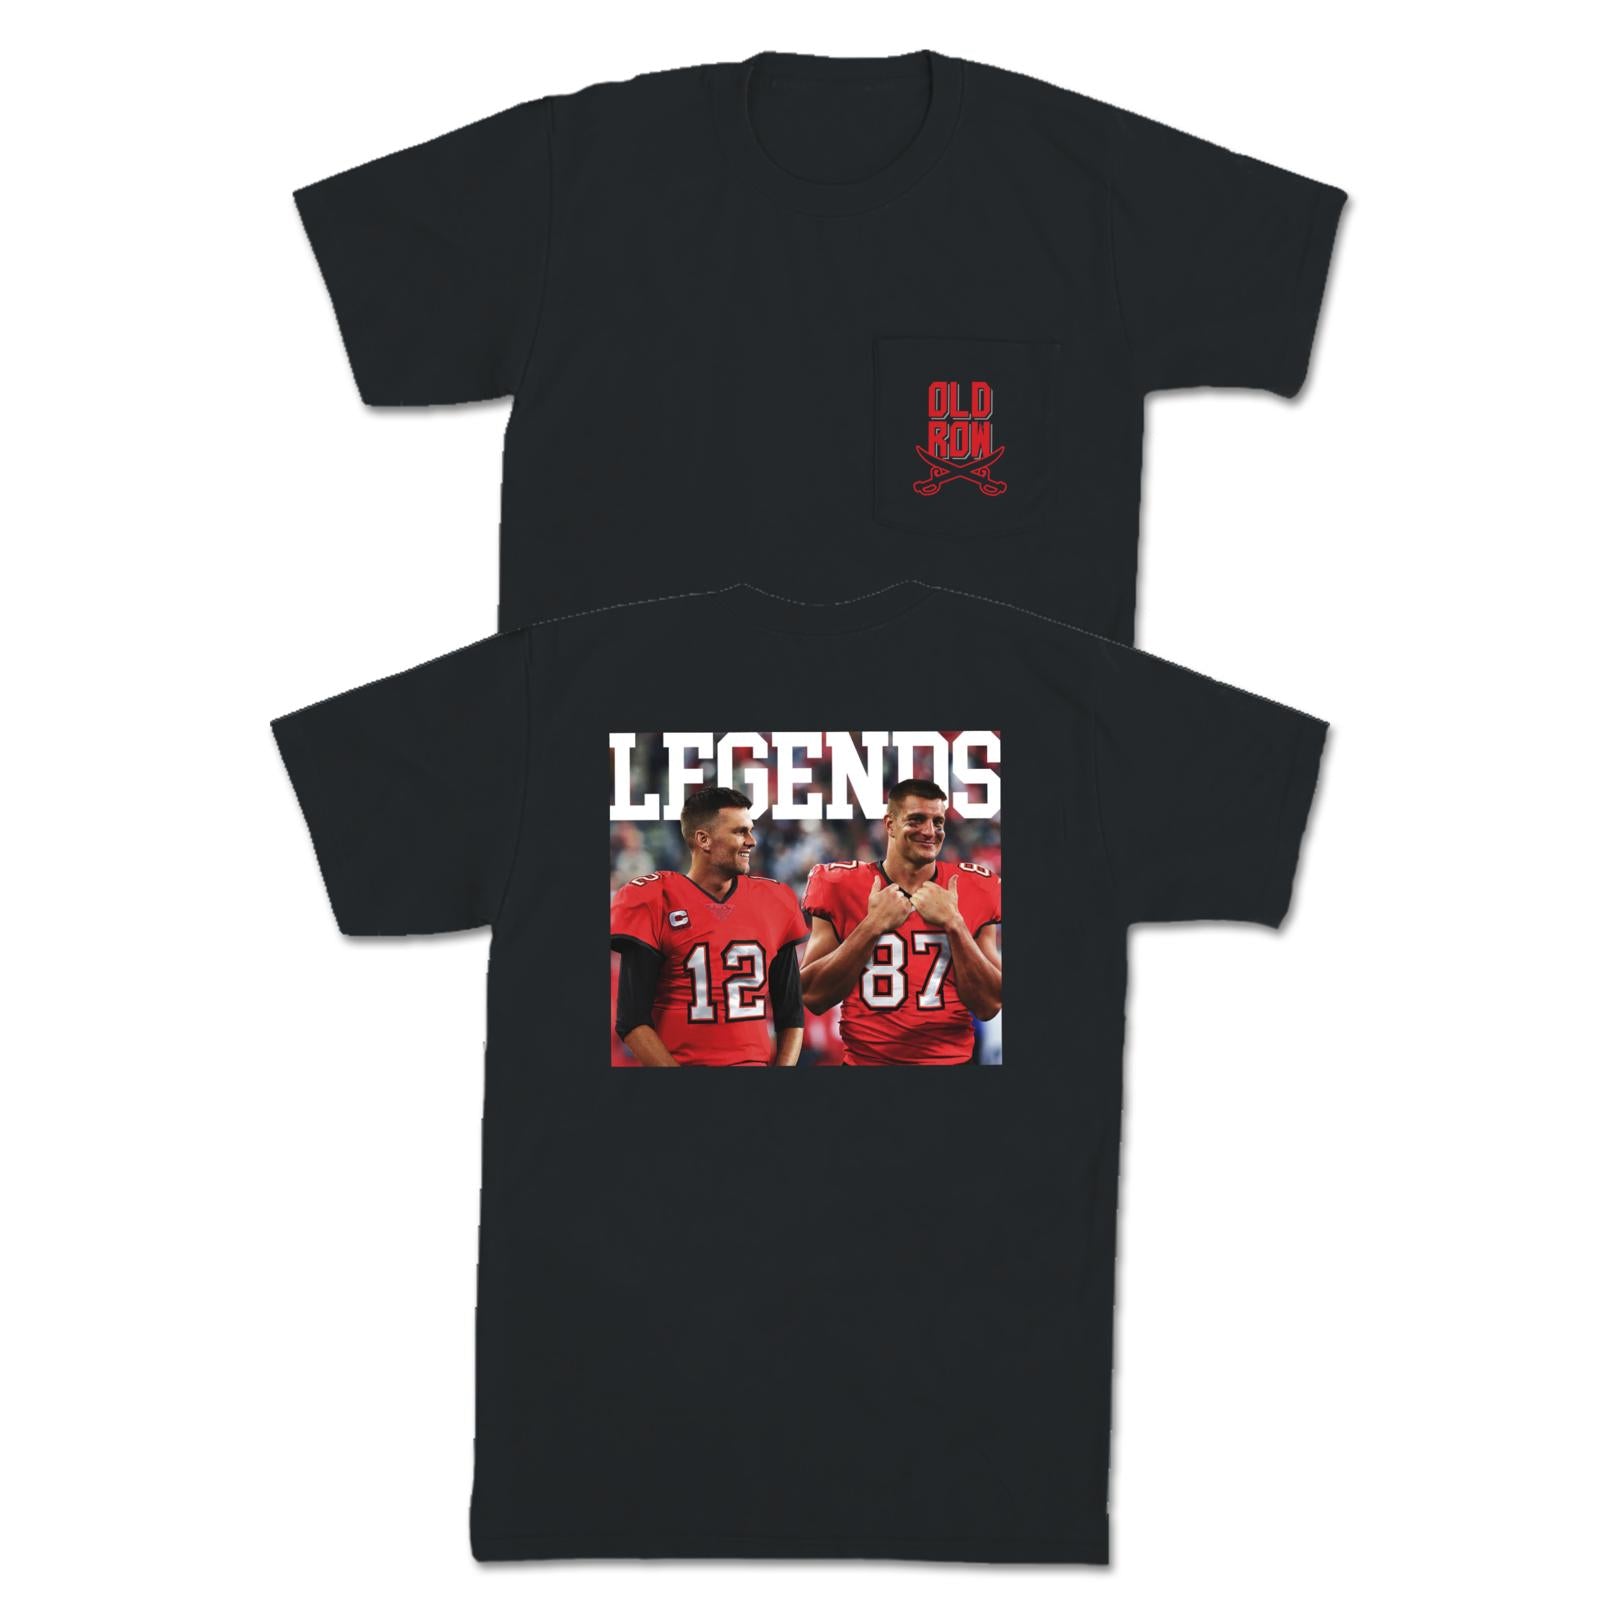 Tom Brady and Gronk Back Together One Again The TB Legends Pocket Tee